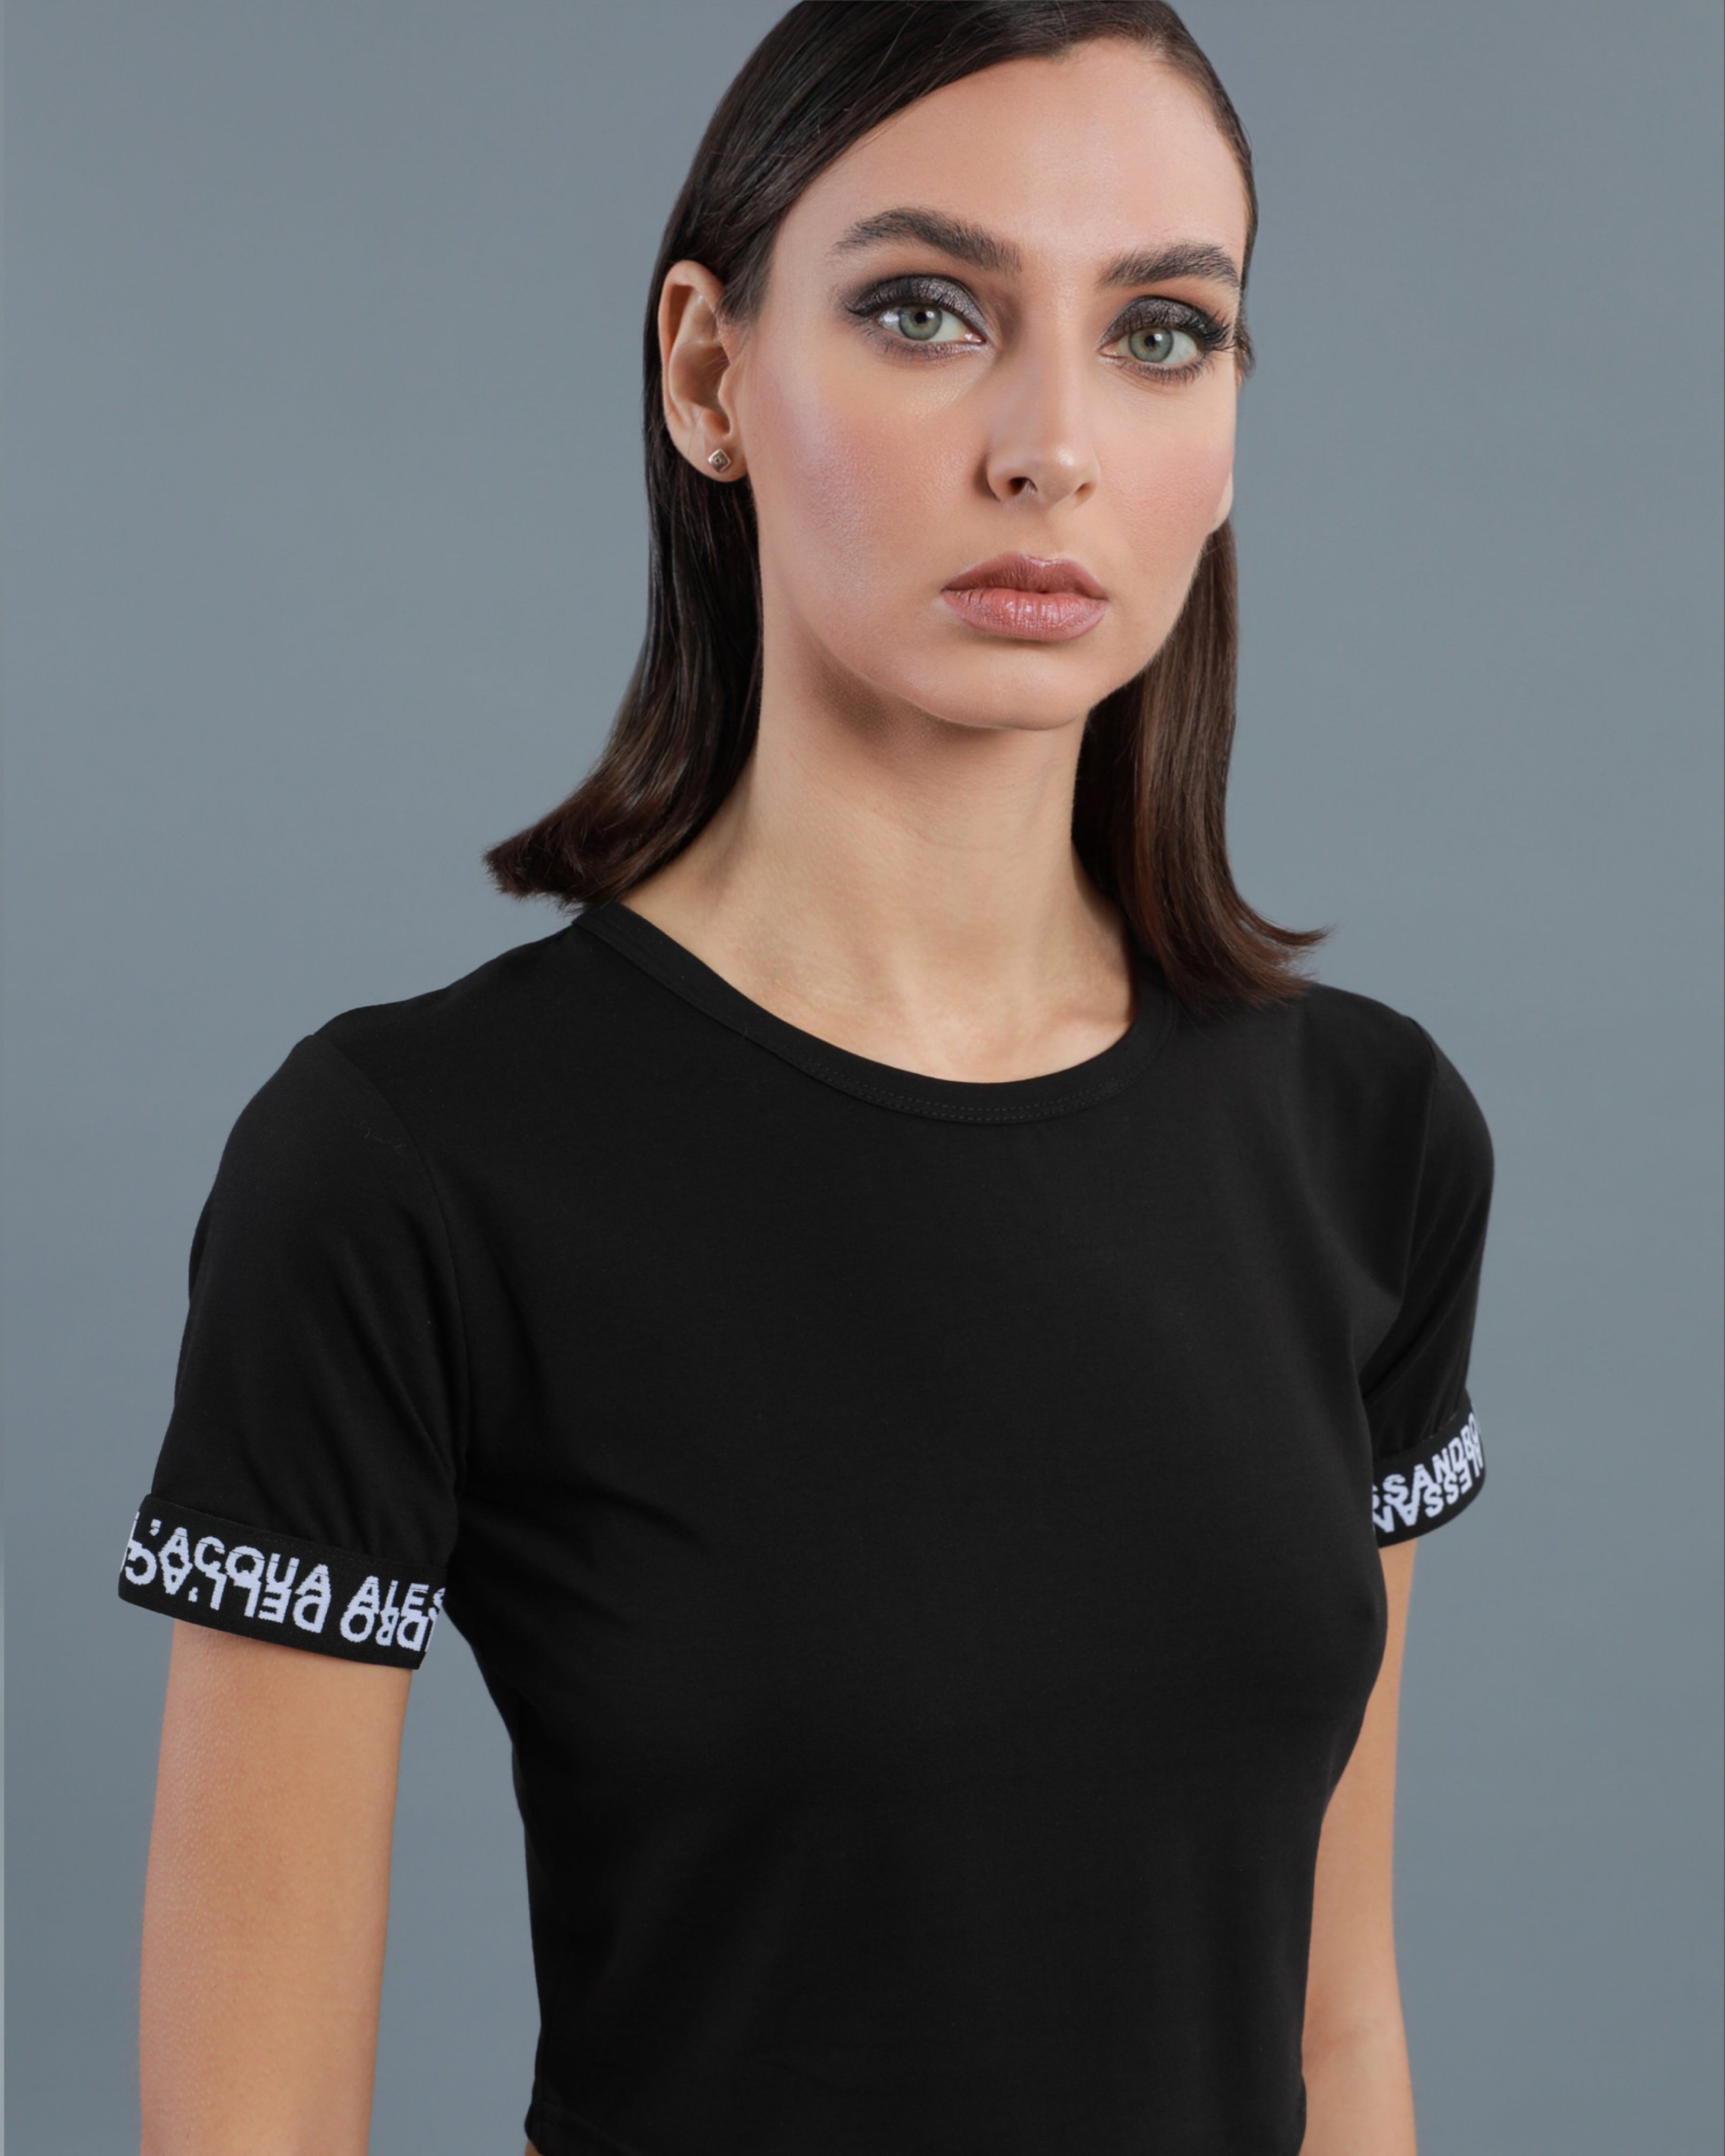 Women Shirts and Tops